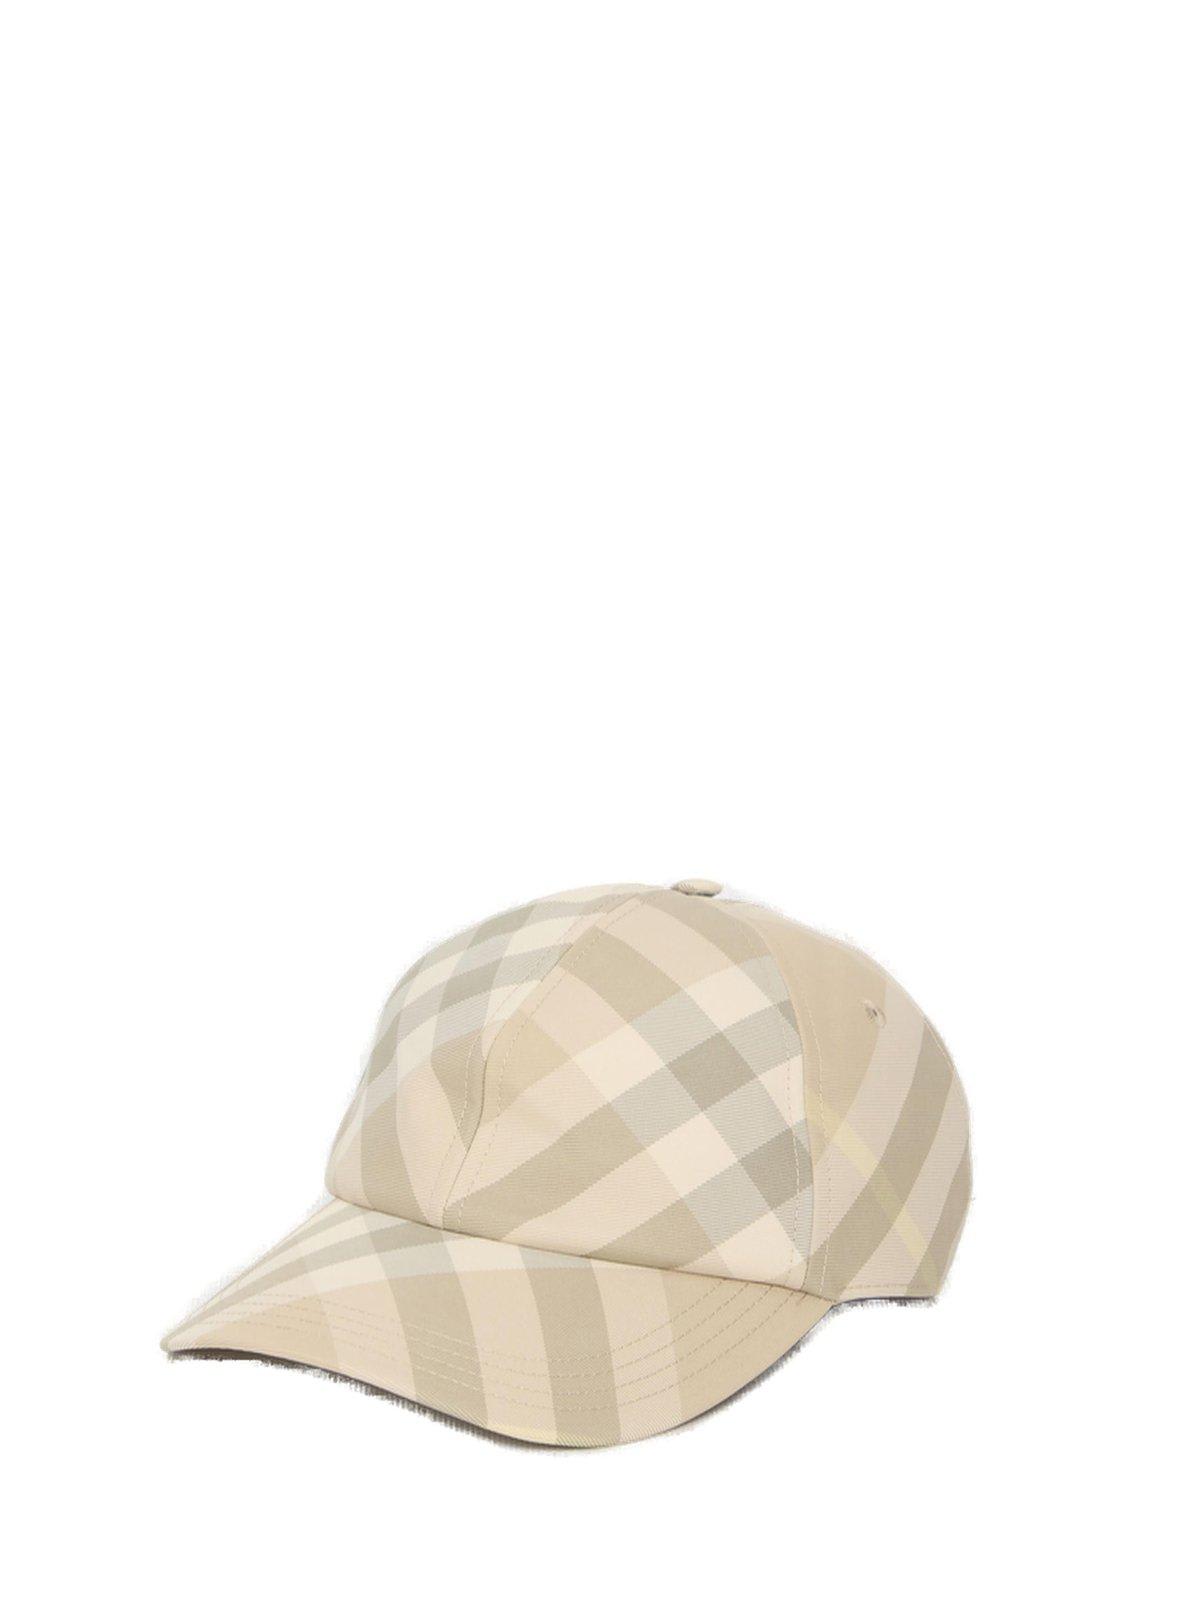 Burberry Checked Baseball Hat In Brown/white